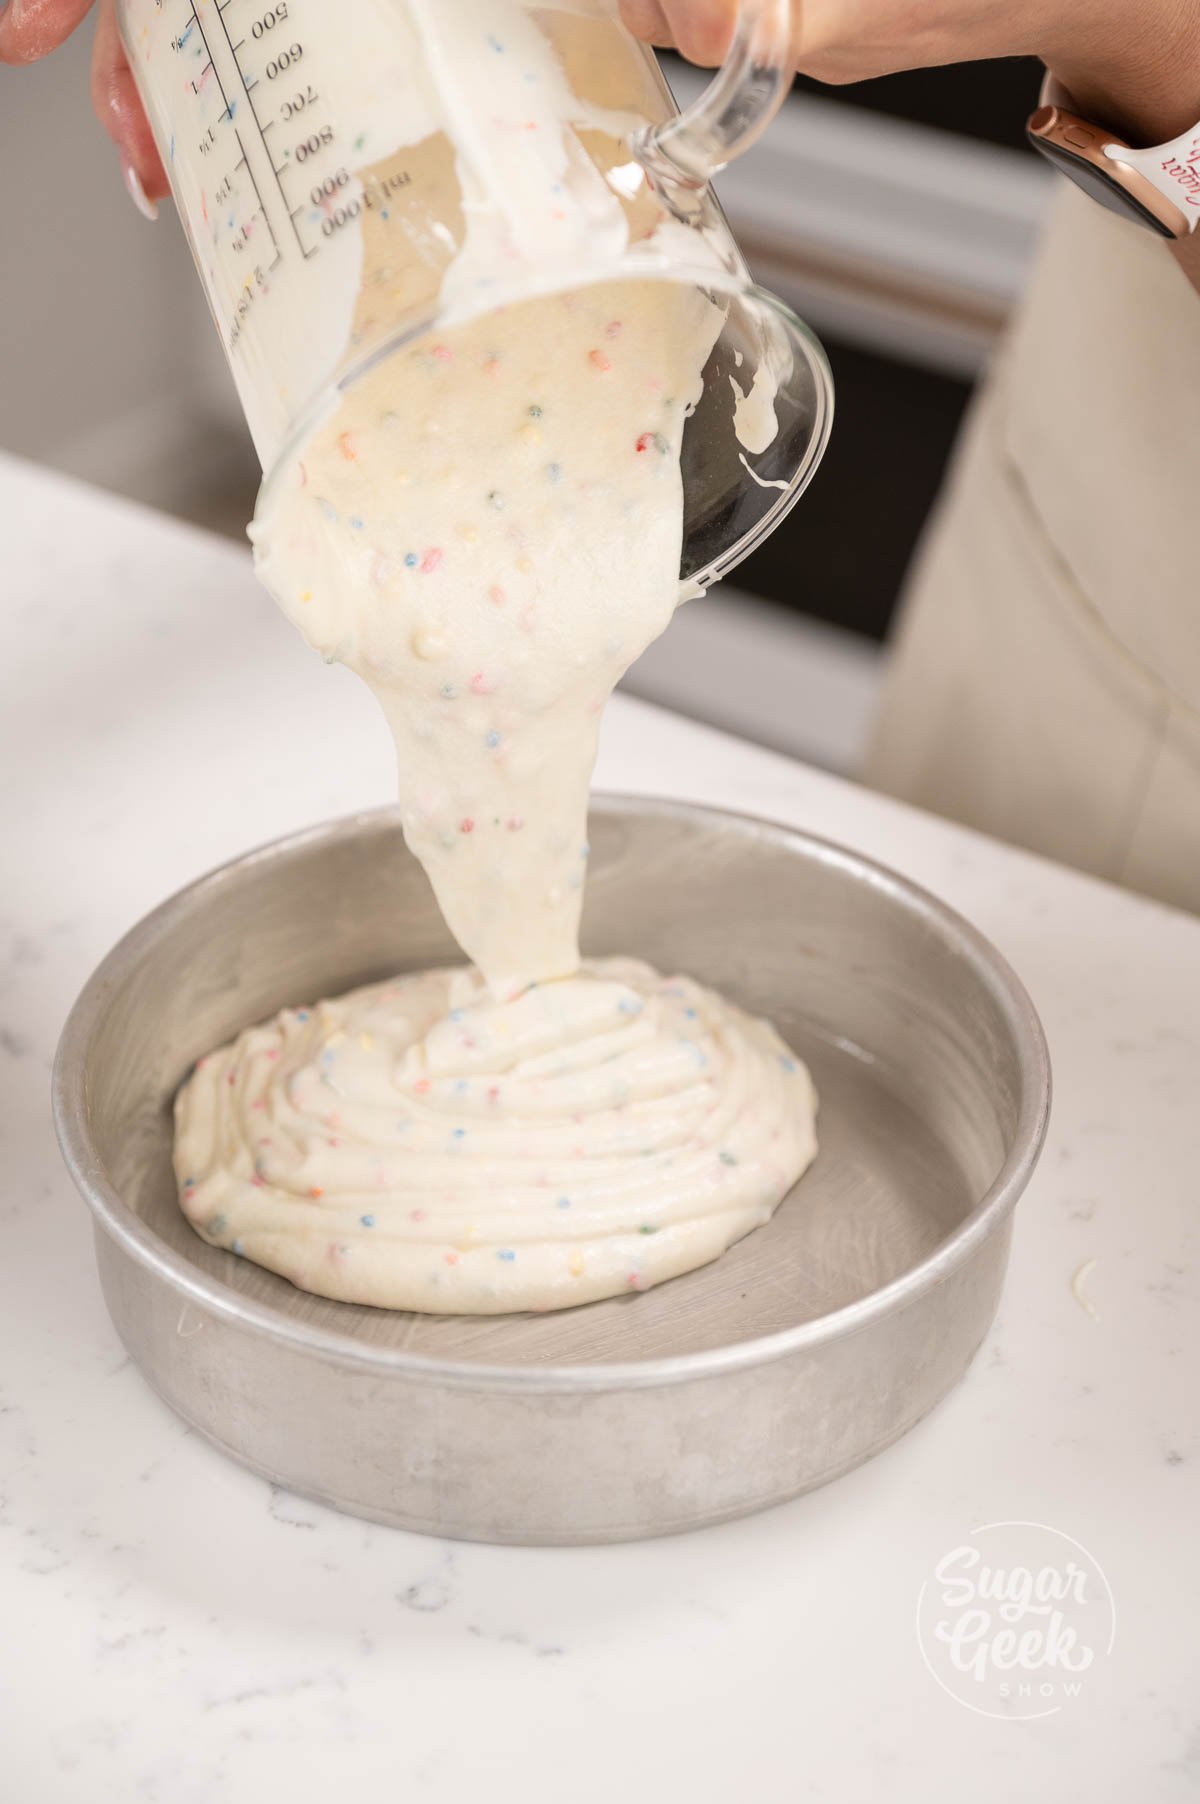 Glass measuring cup being held above cake pans pouring cake batter into the cake pans